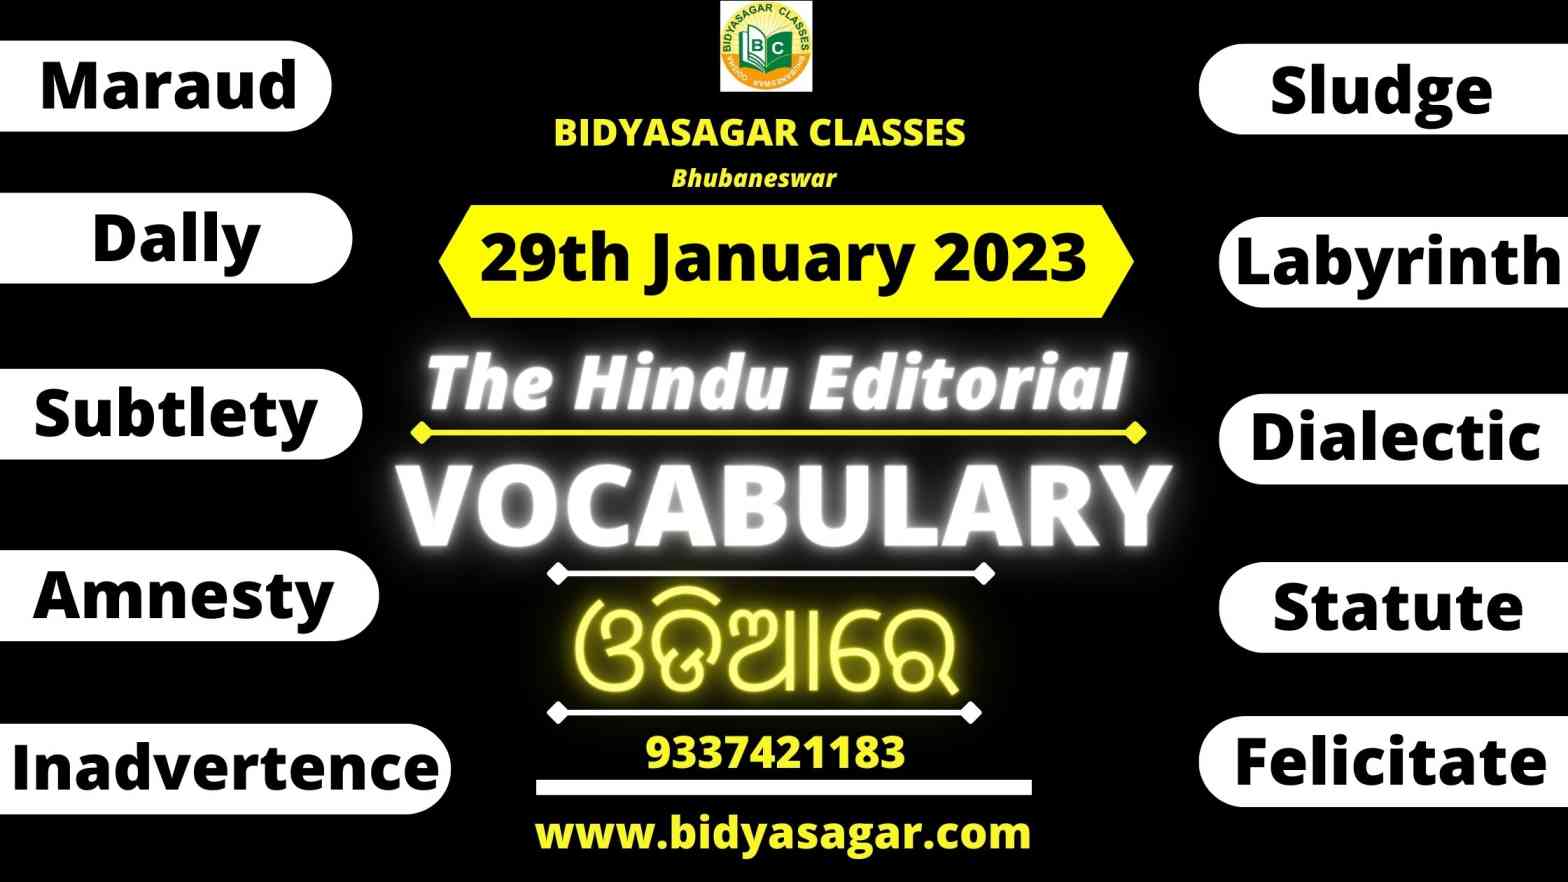 The Hindu Editorial Vocabulary of 29th January 2023